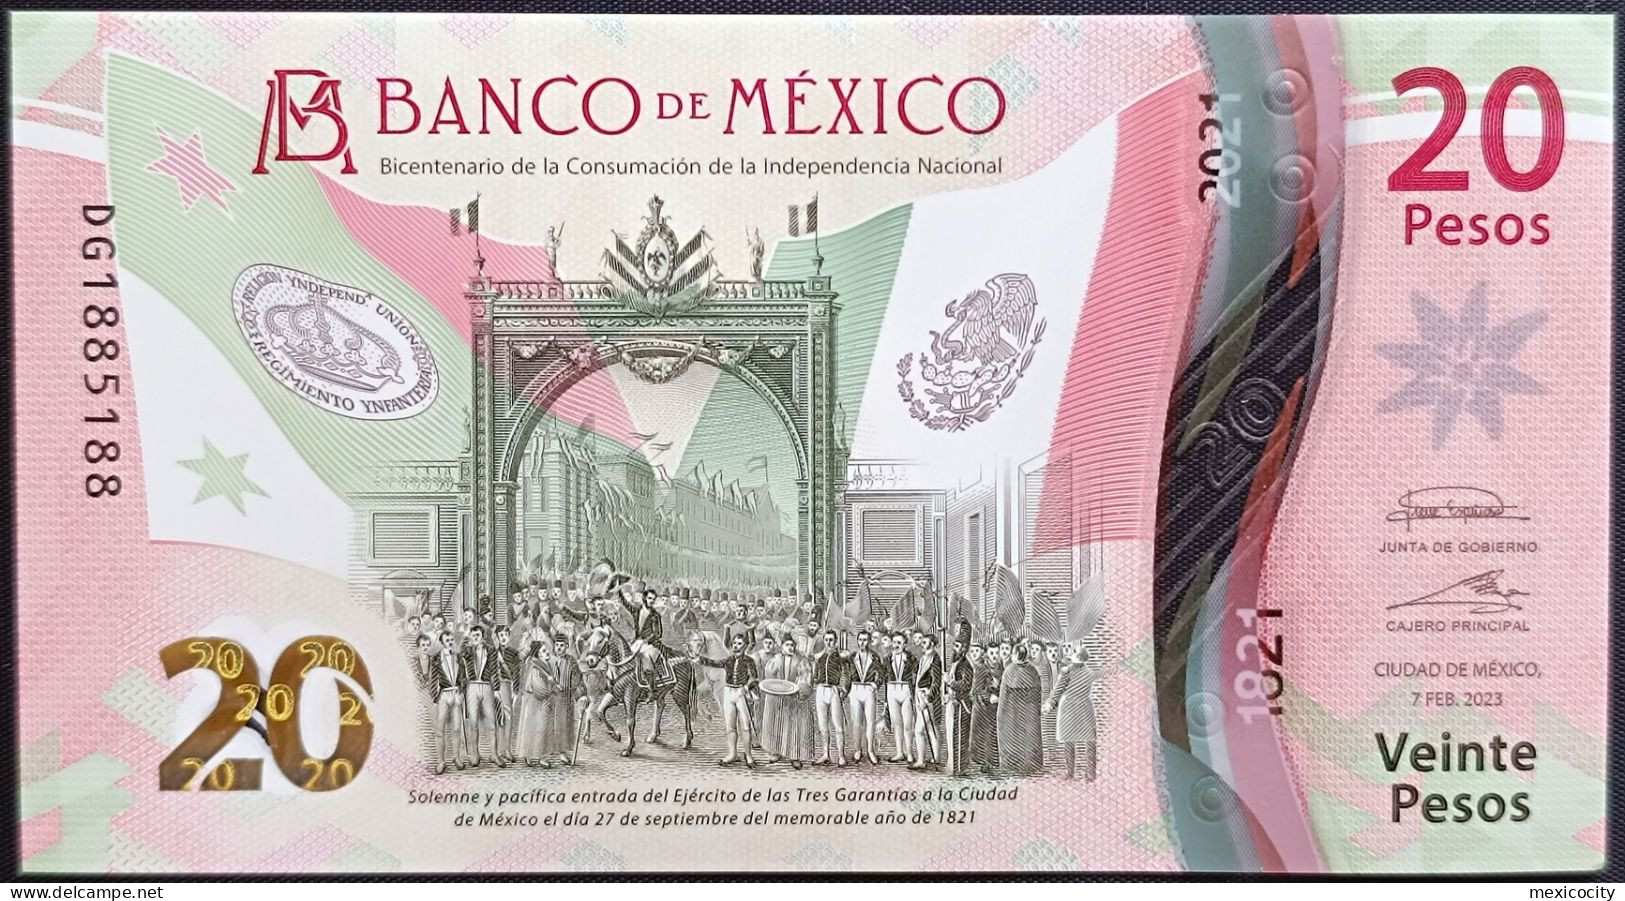 MEXICO $20 SERIES DG1885188 REPEAT # - 7-FEBR-2023 INDEPENDENCE POLYMER NOTE BU Mint Crisp - Mexico